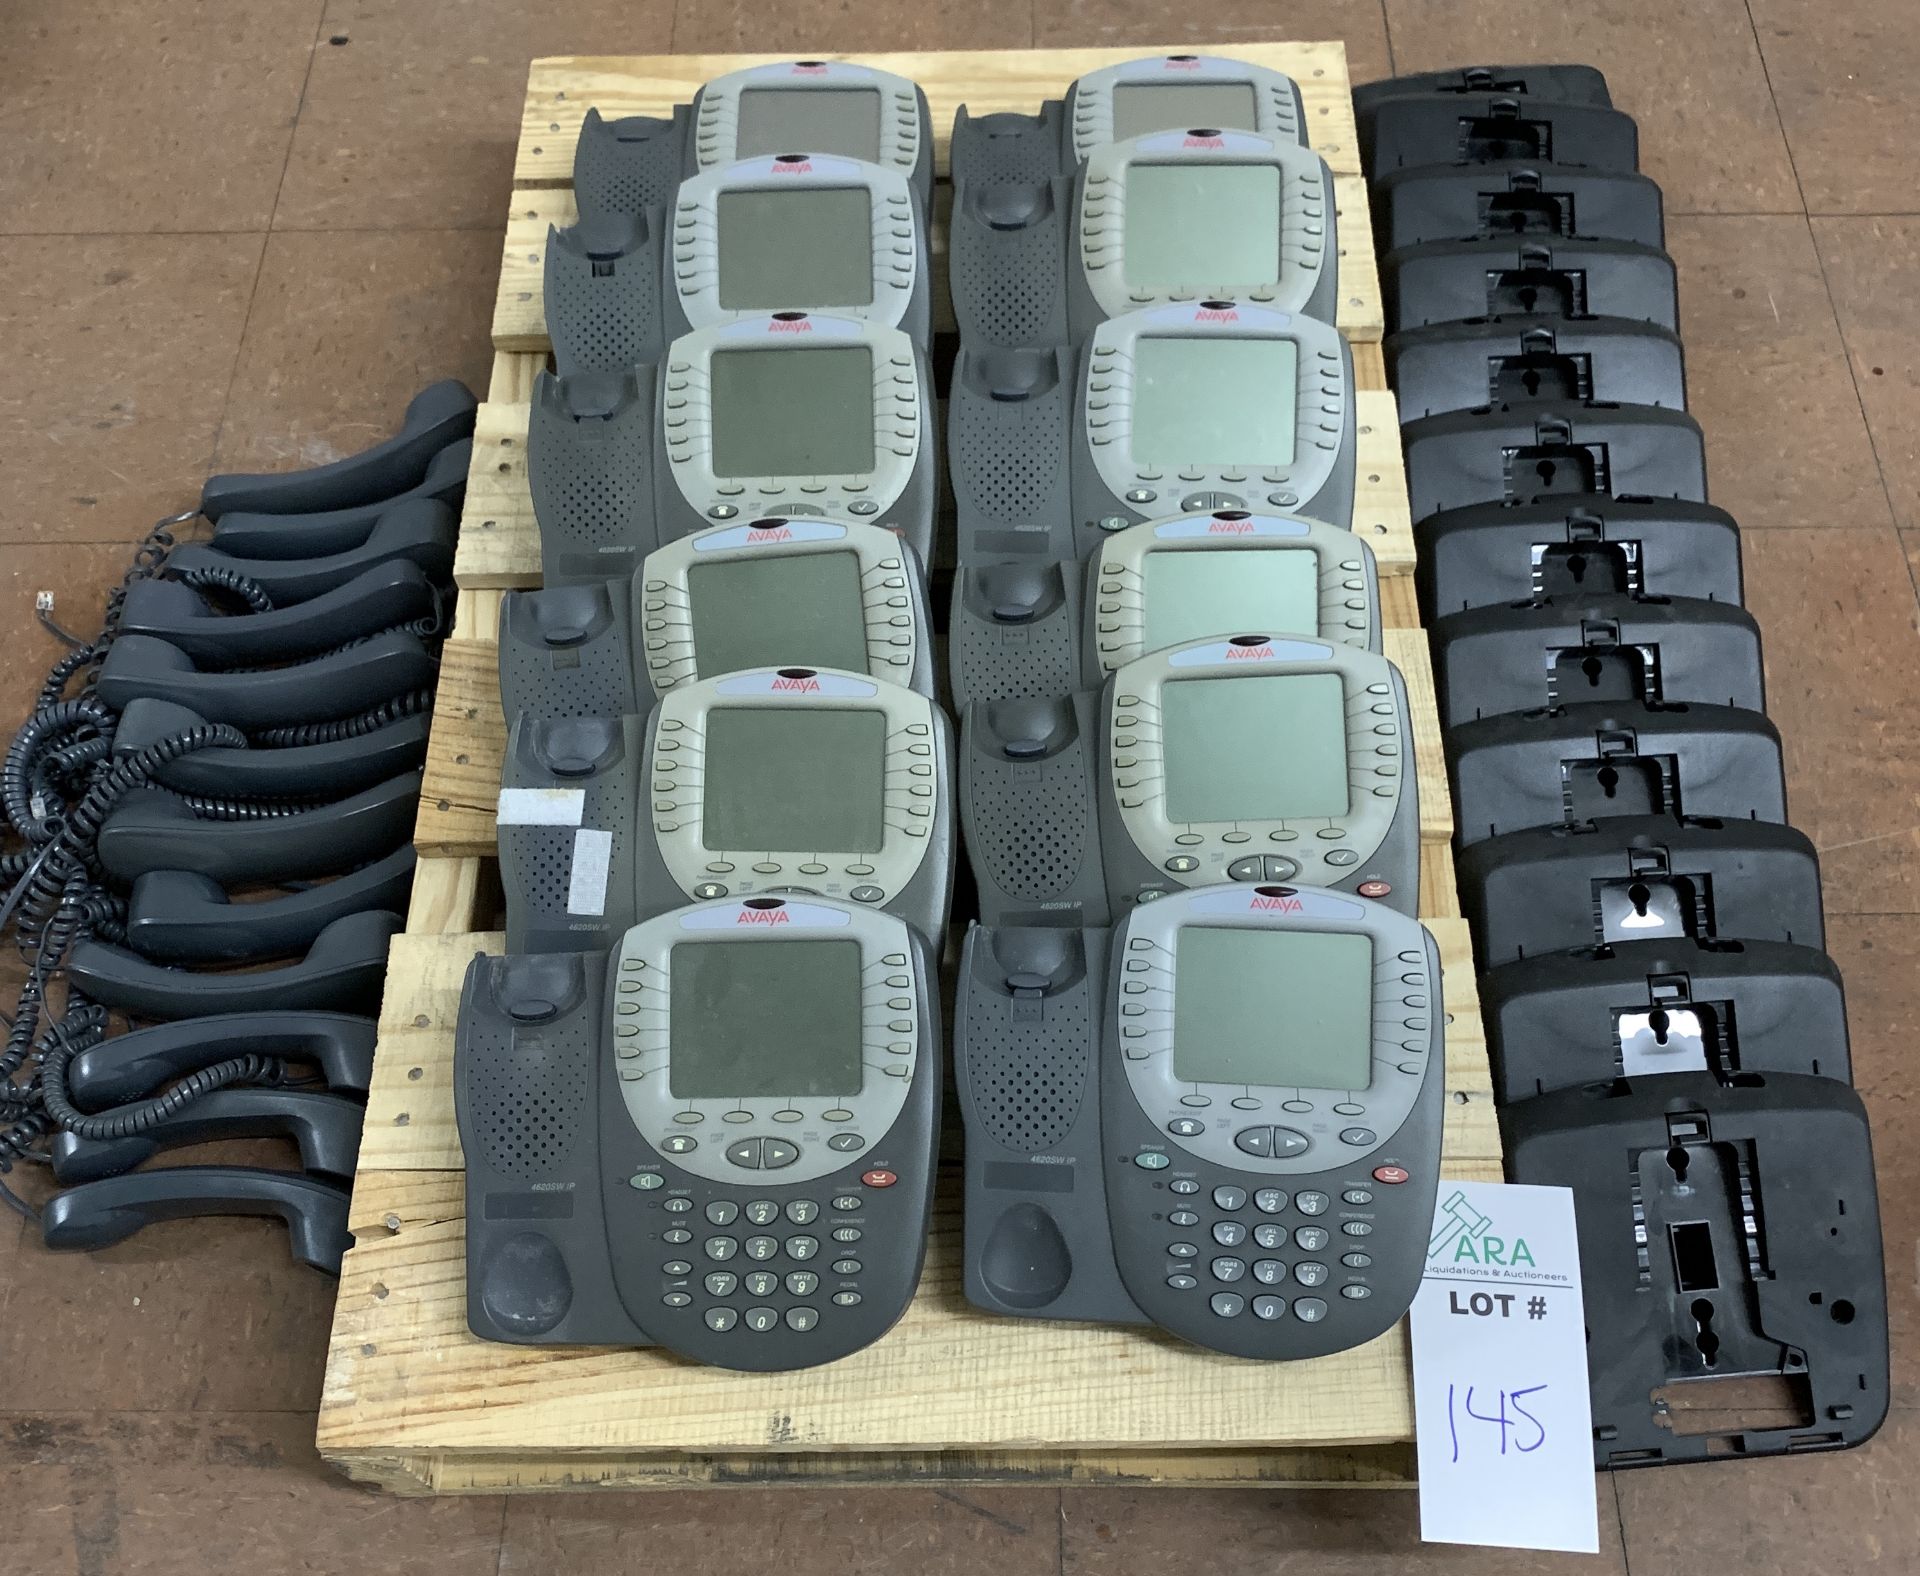 12 AVAYA PHONE HANDSETS, MODEL 4620SW IPALL ITEMS ARE SOLD AS IS UNTESTED BUT CAME FROM A WORKING